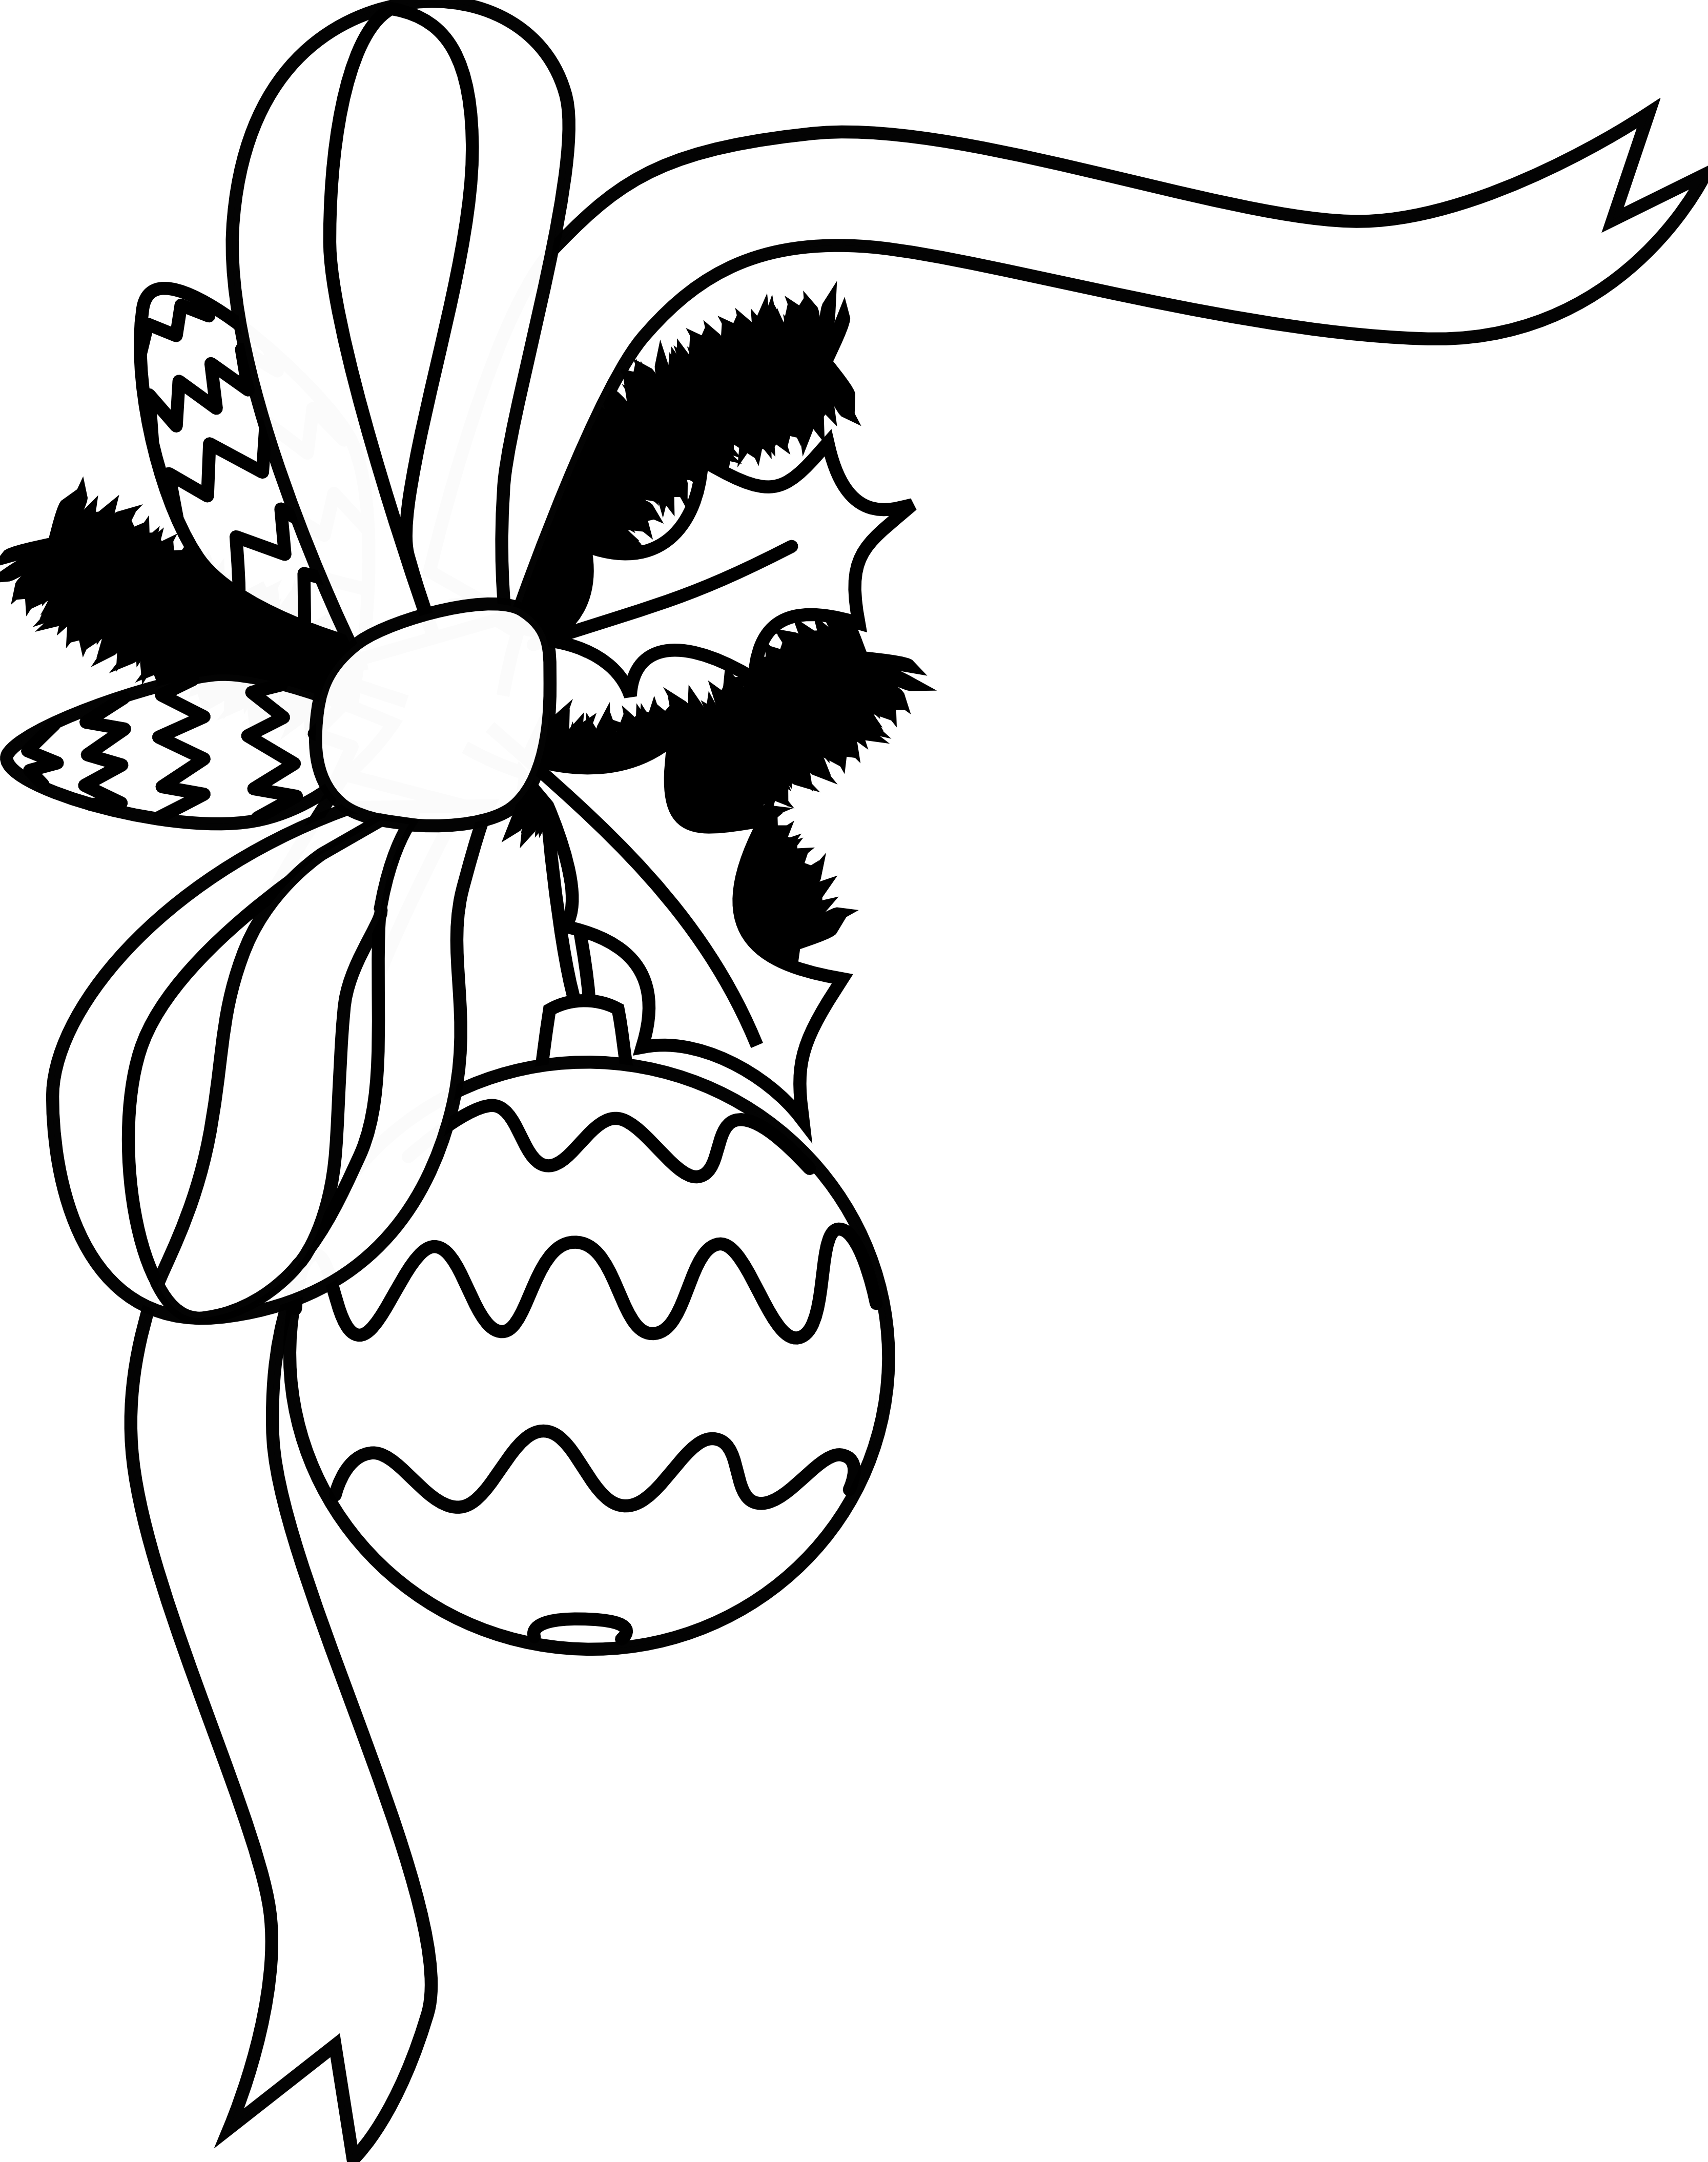 Soup clipart black and white. Free christmas images download